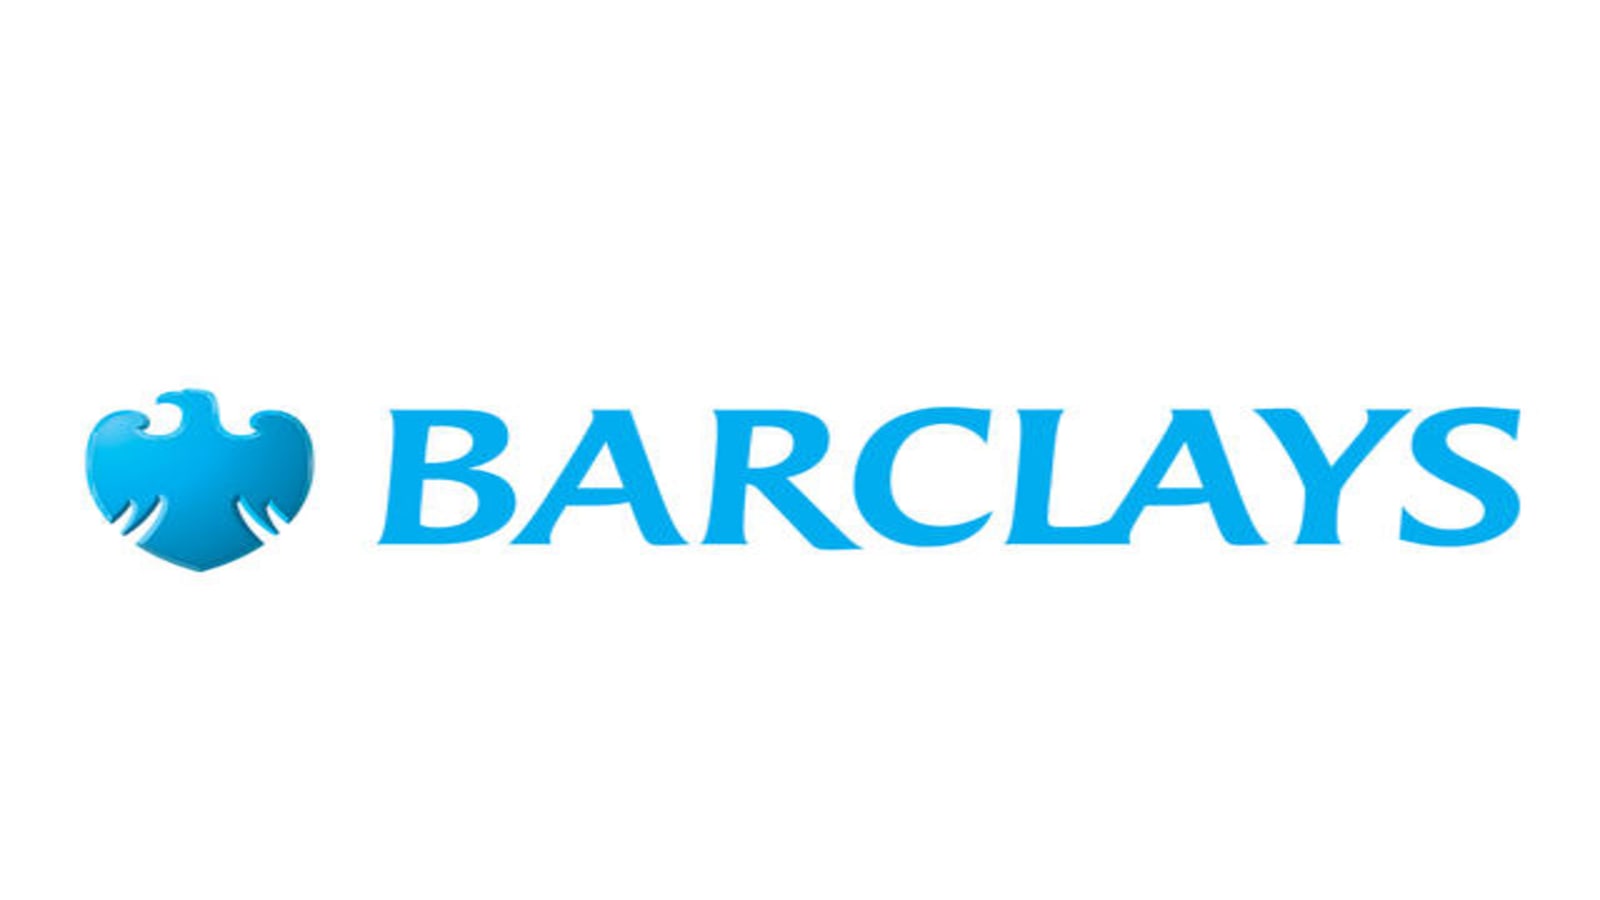 Barclays Credit Card - Learn How to Apply Online for Barclaycard Rewards